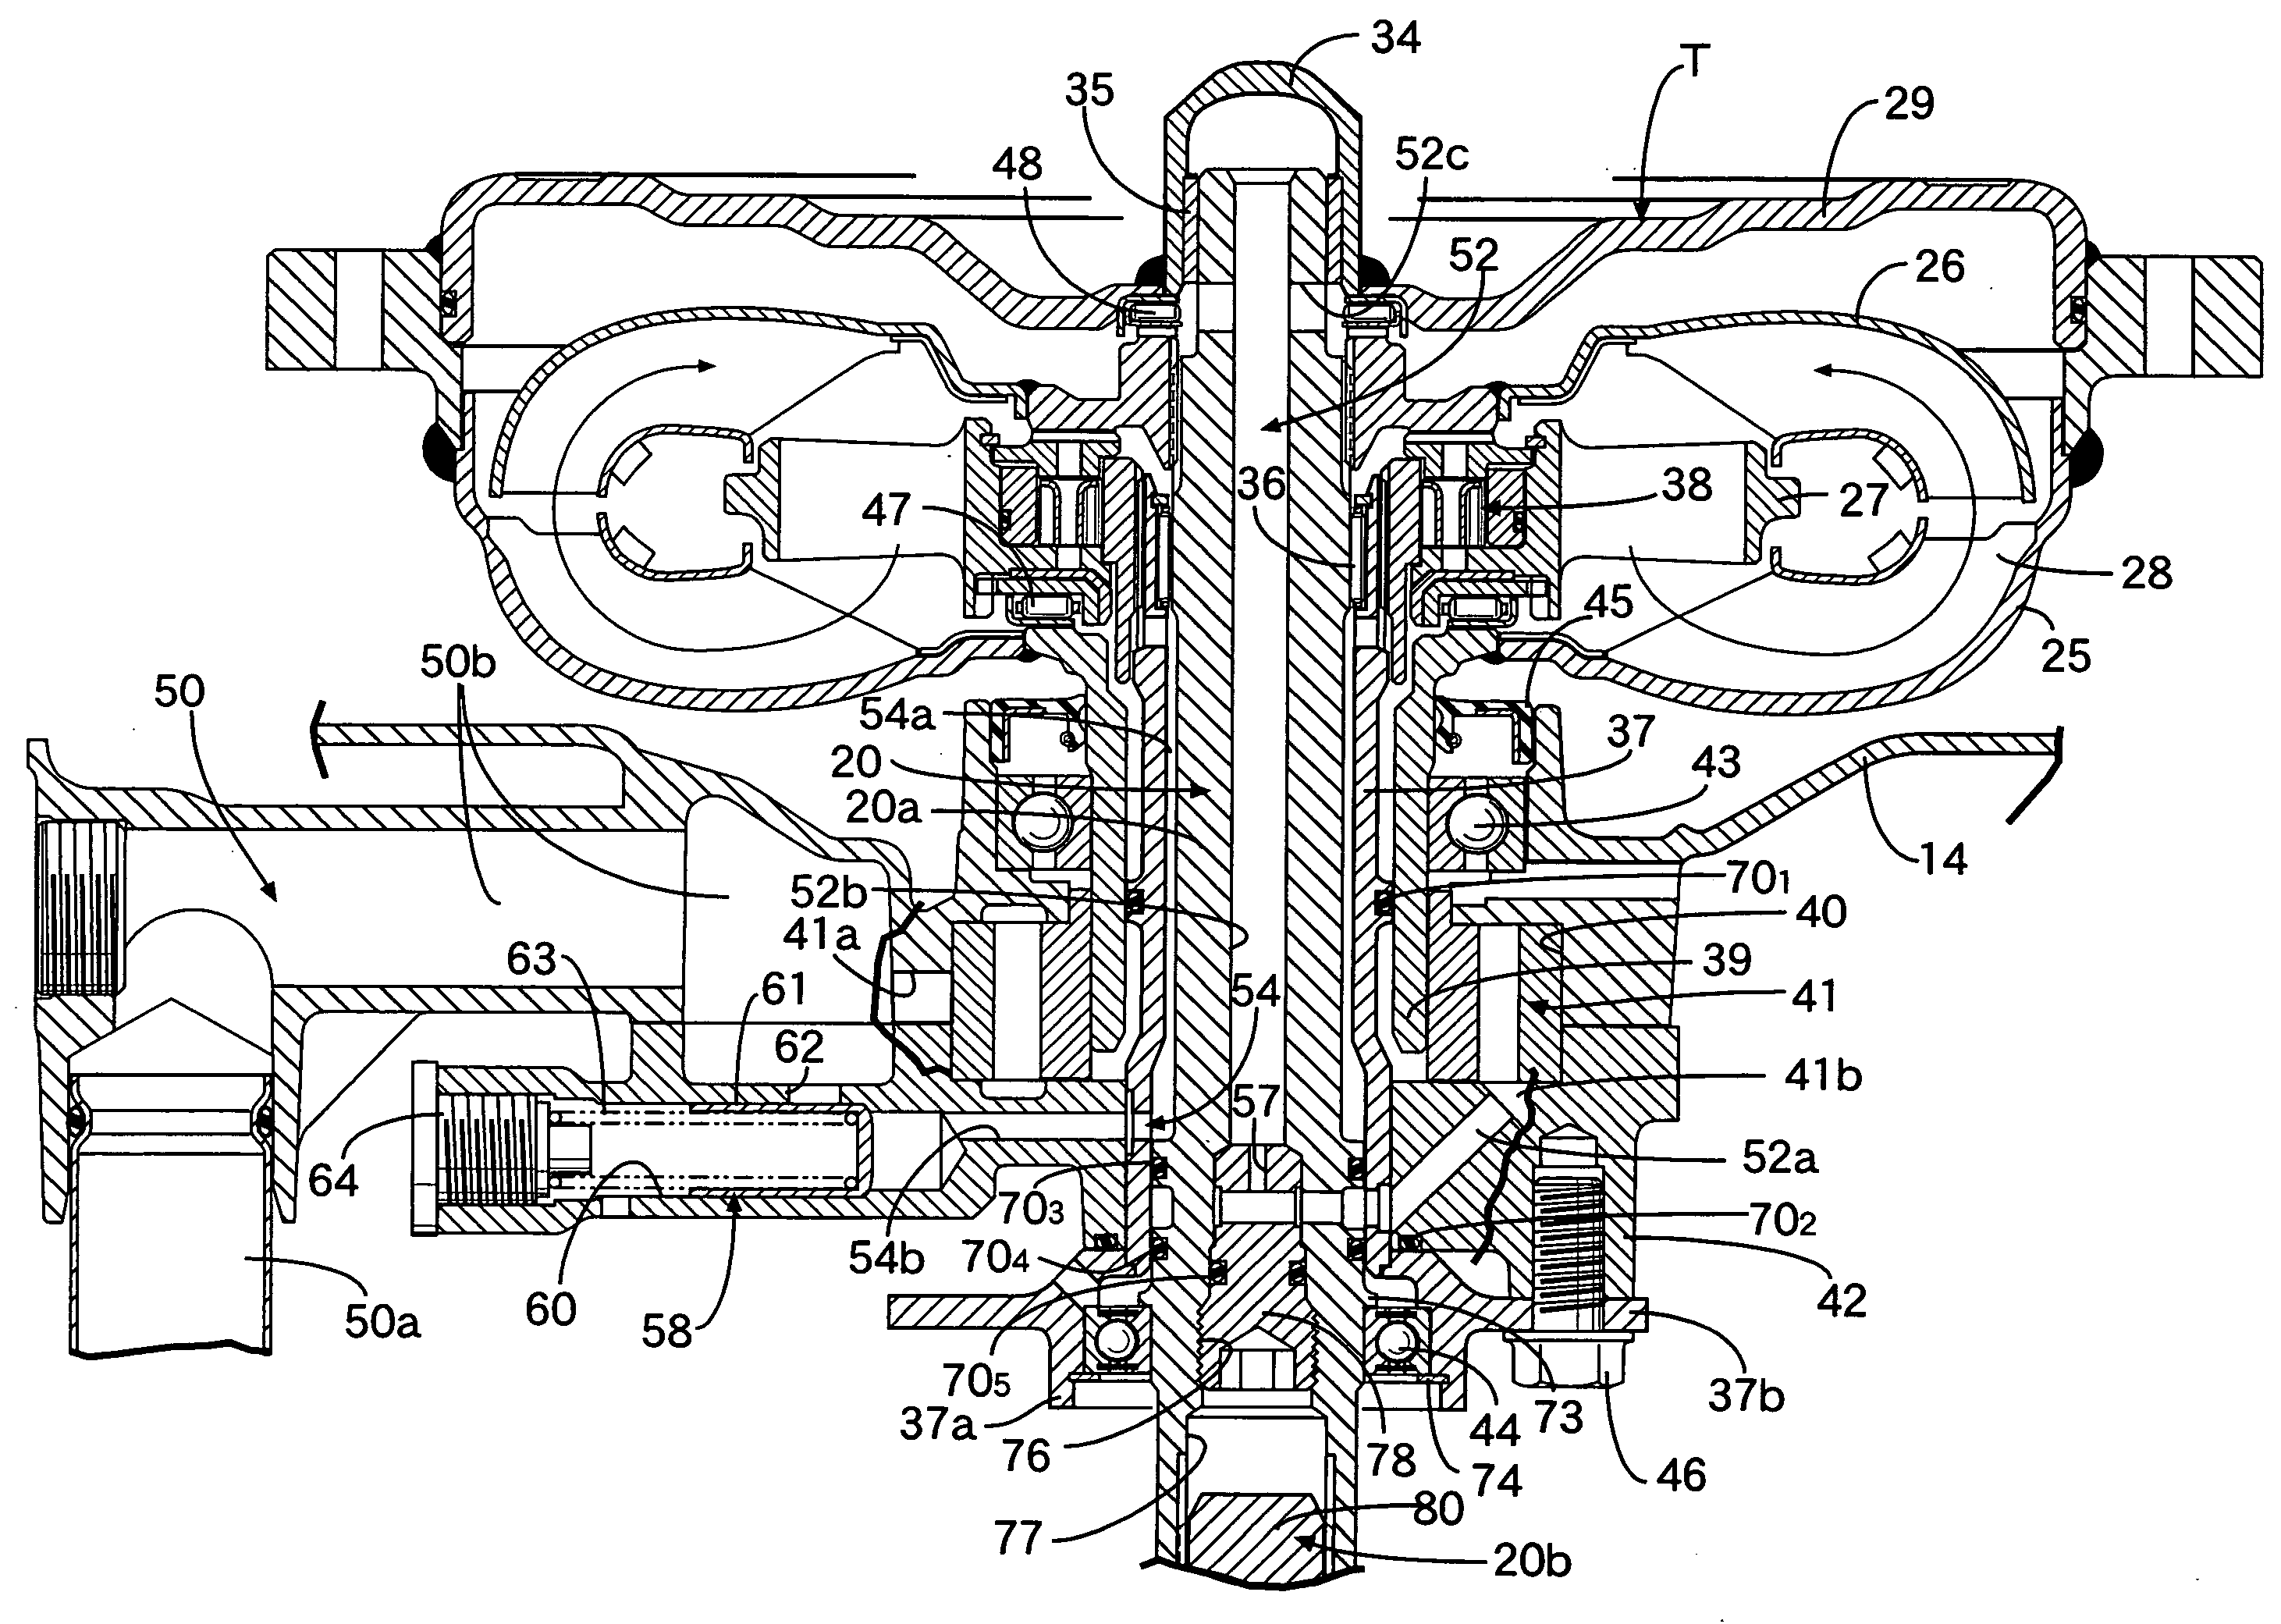 Vertical fluid power transmission and outboard engine system